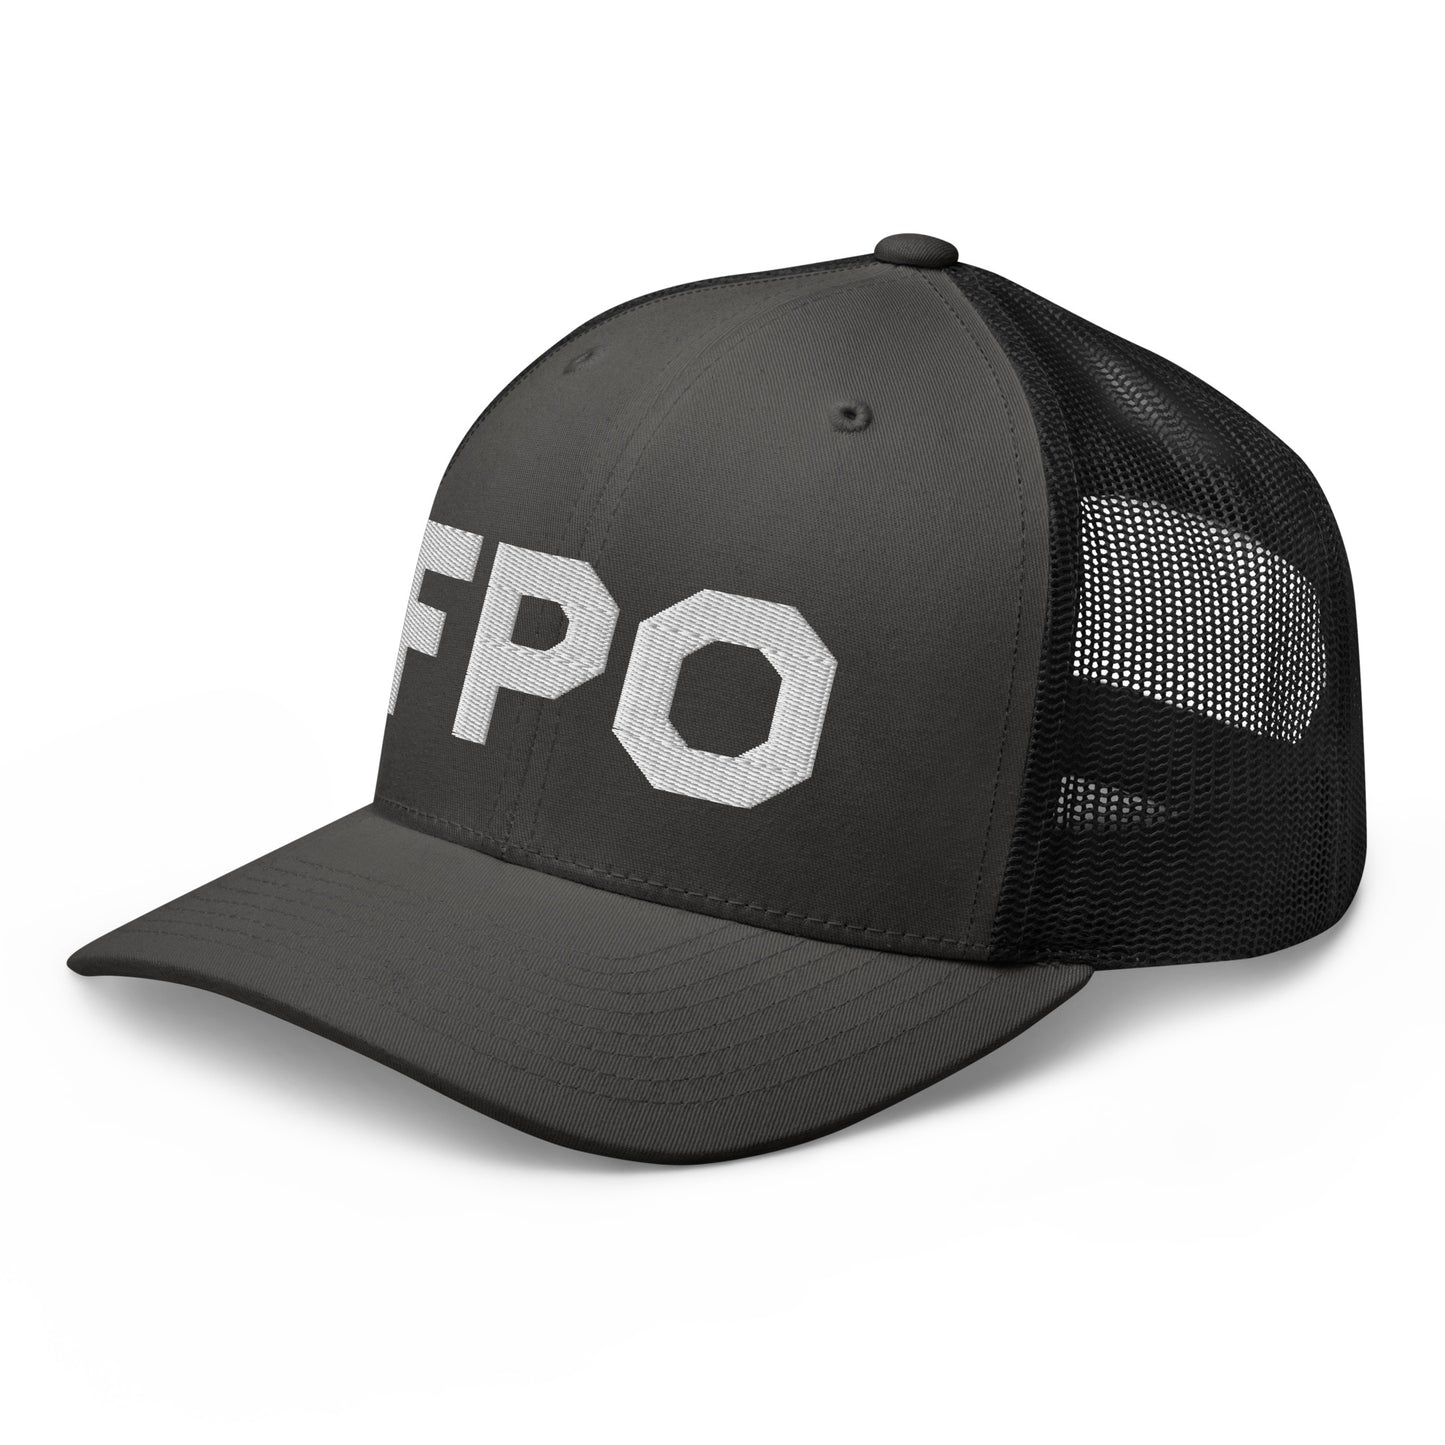 FPO Embroidered Trucker Cap